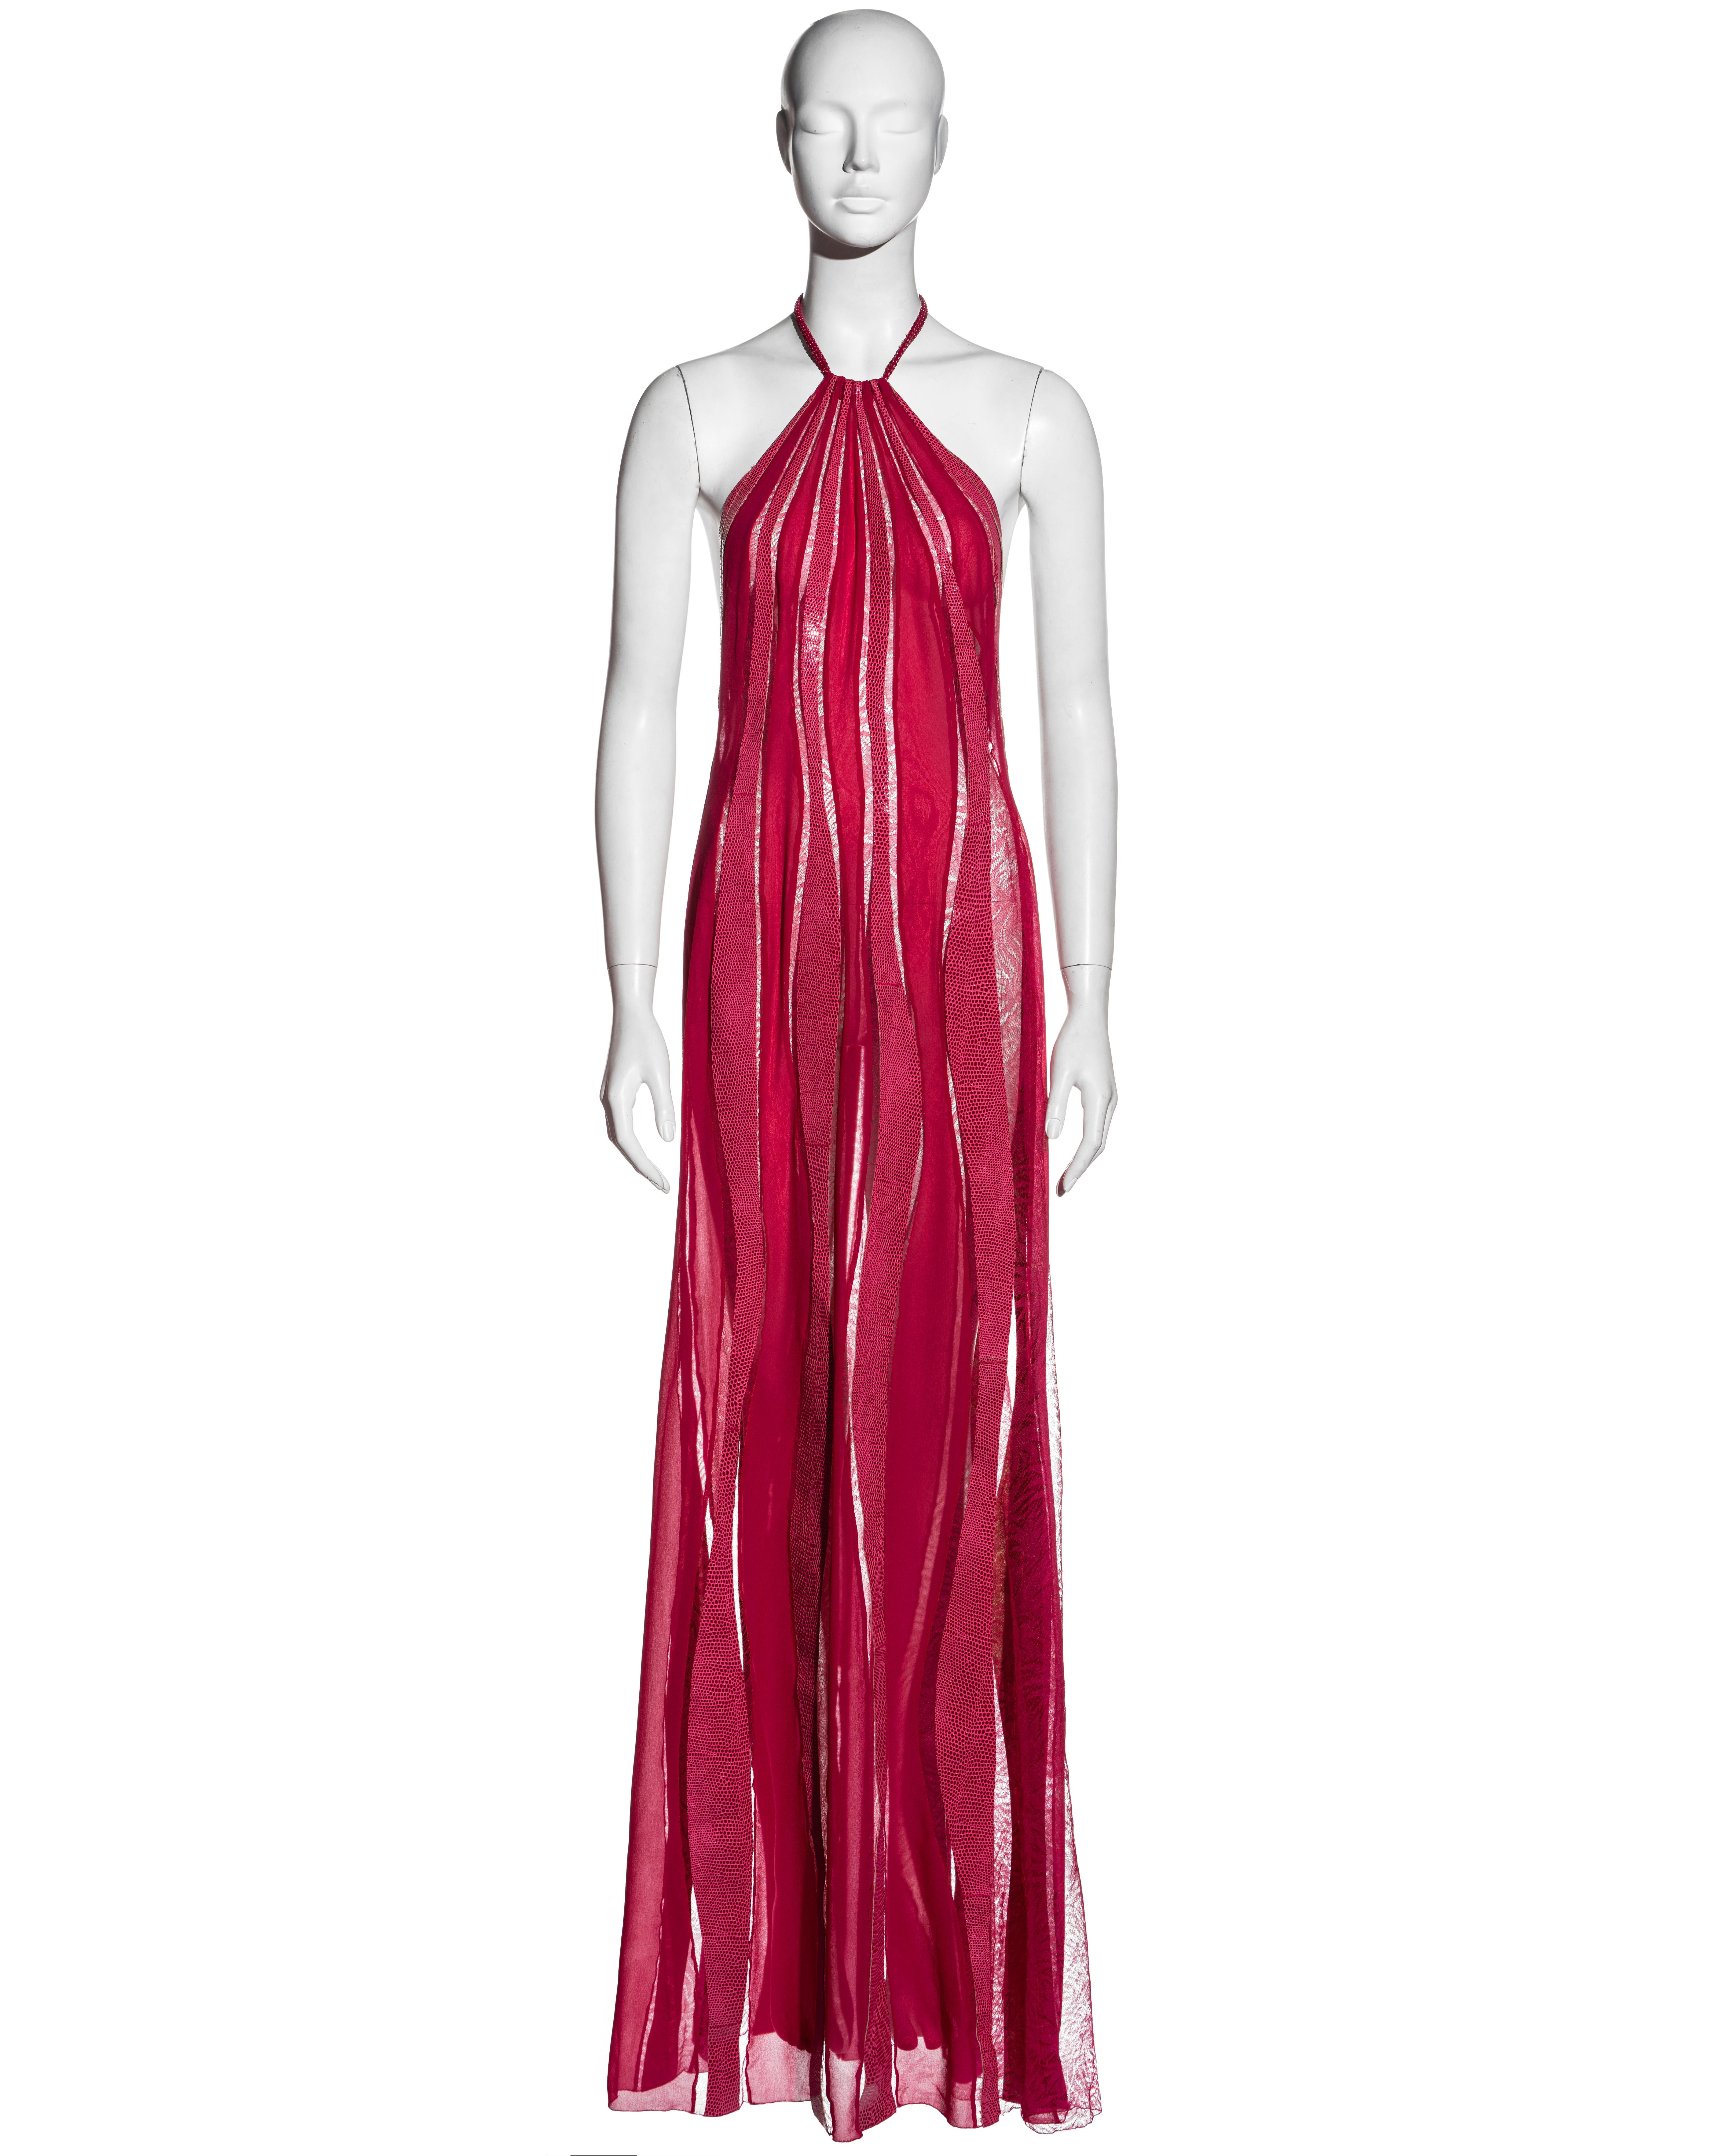 ▪ Gianni Versace pink halter neck maxi dress
▪ Silk chiffon, leather, and net lace panels 
▪ Hatlerneck embellished with crystals 
▪ Open low back 
▪ Concealed zipper at center back 
▪ IT 42 - FR 38 - UK 10 
▪ Fall-Winter 2000
